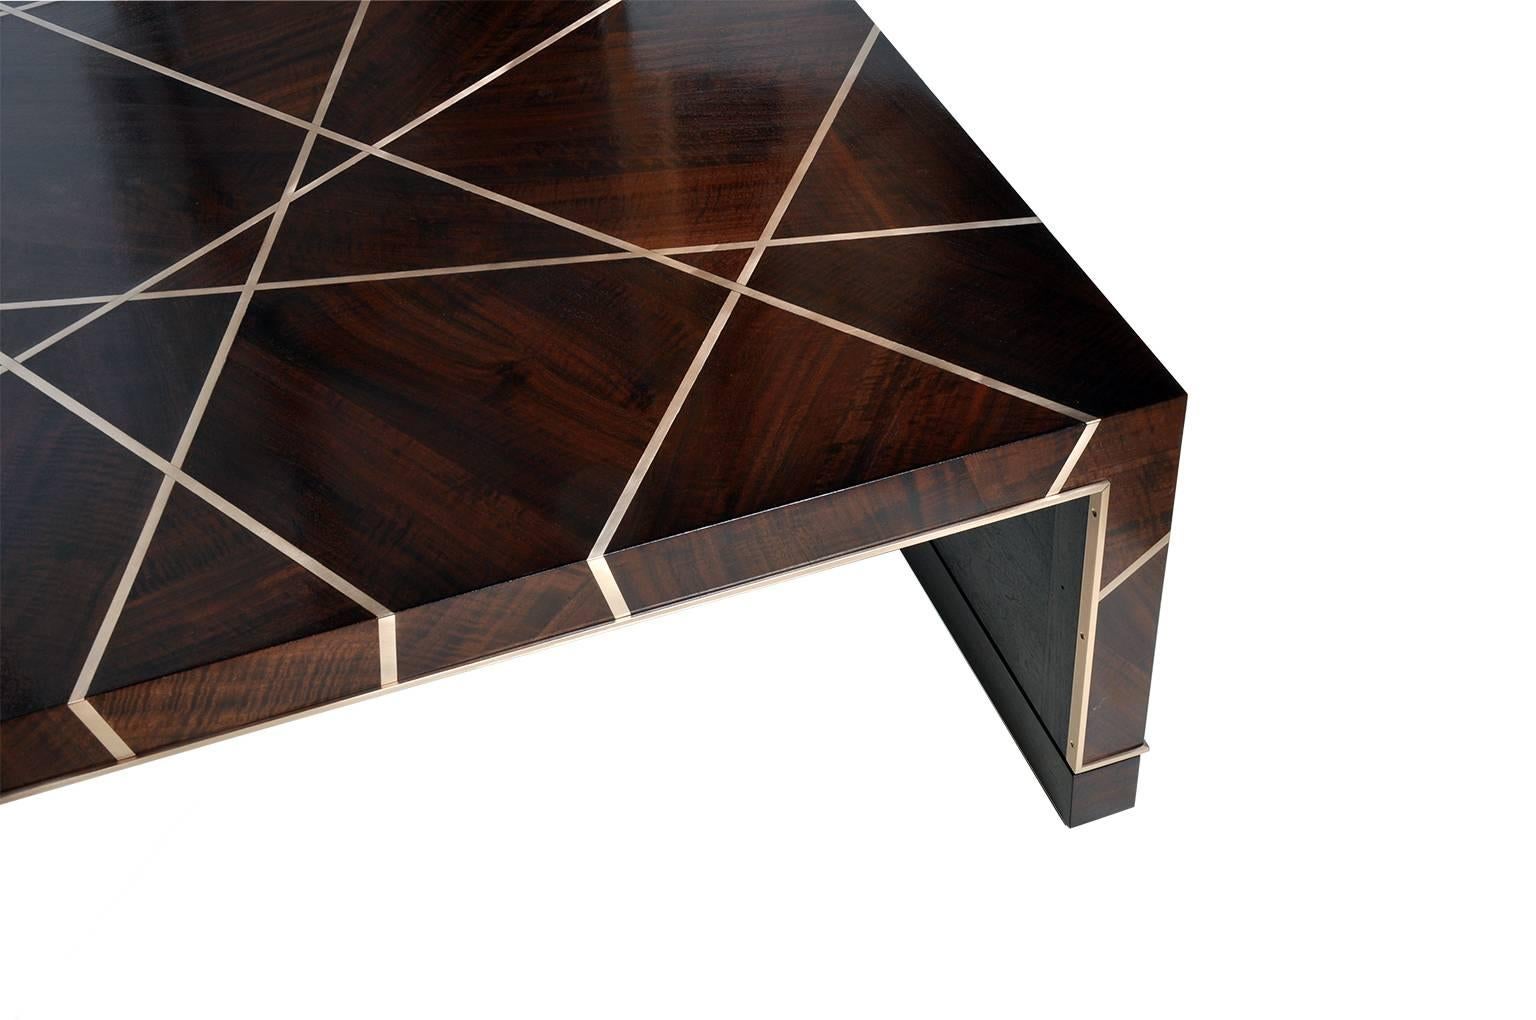 This ray cocktail table is the square version in this series, a geometric beauty and a wonderful piece of craftsmanship. It is made of Claro walnut, a California native species that has unique depth and rich tones. We have increased its color by